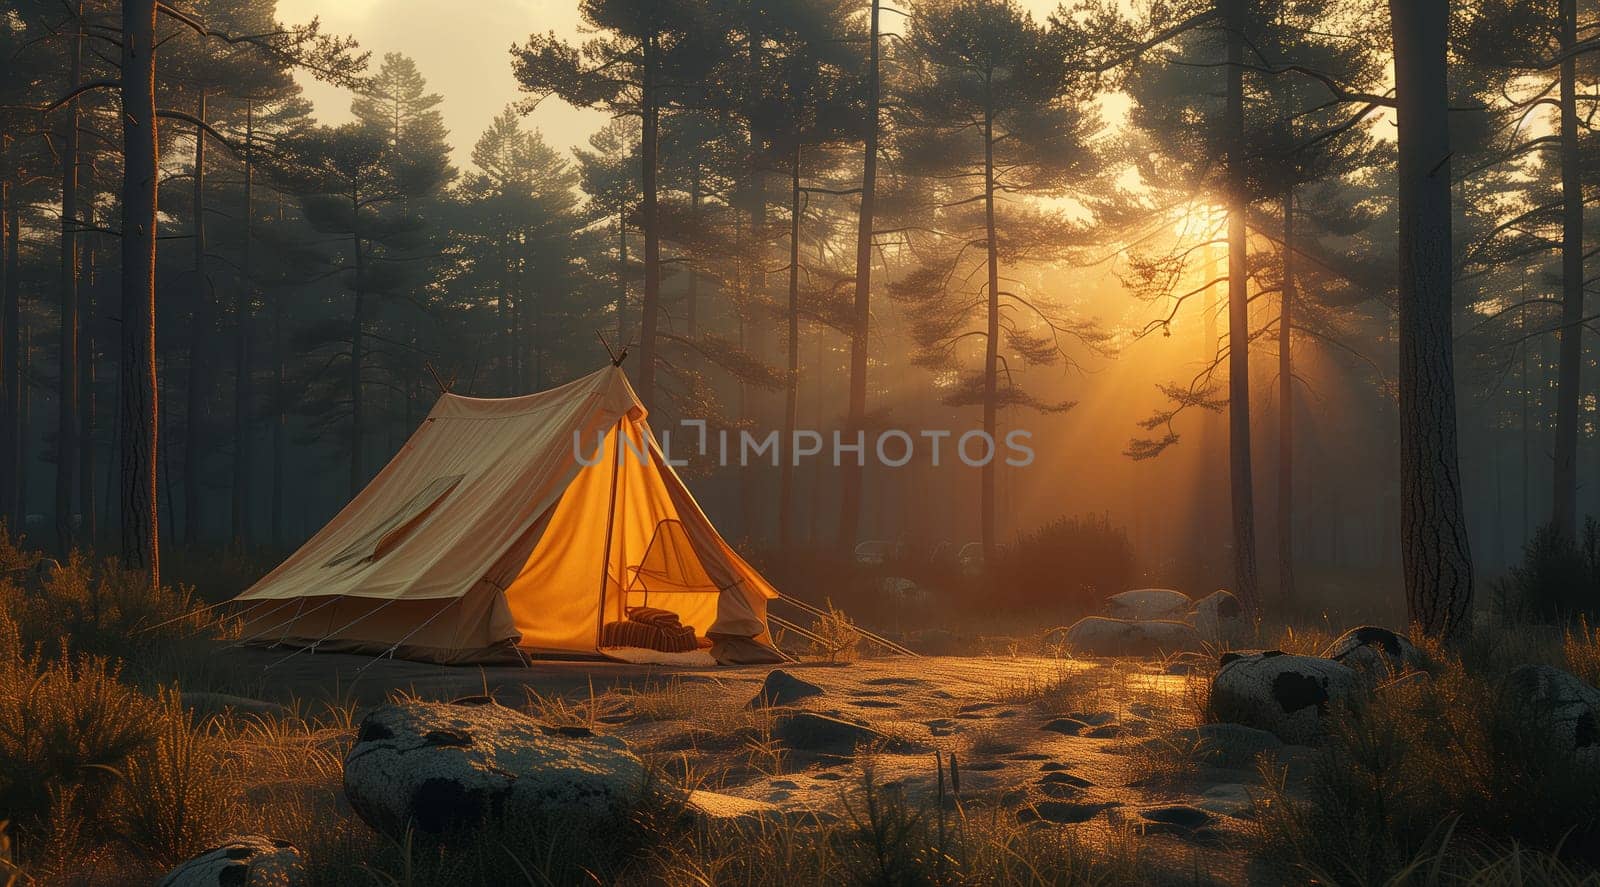 A triangular tent stands among trees in the forest during sunset by richwolf